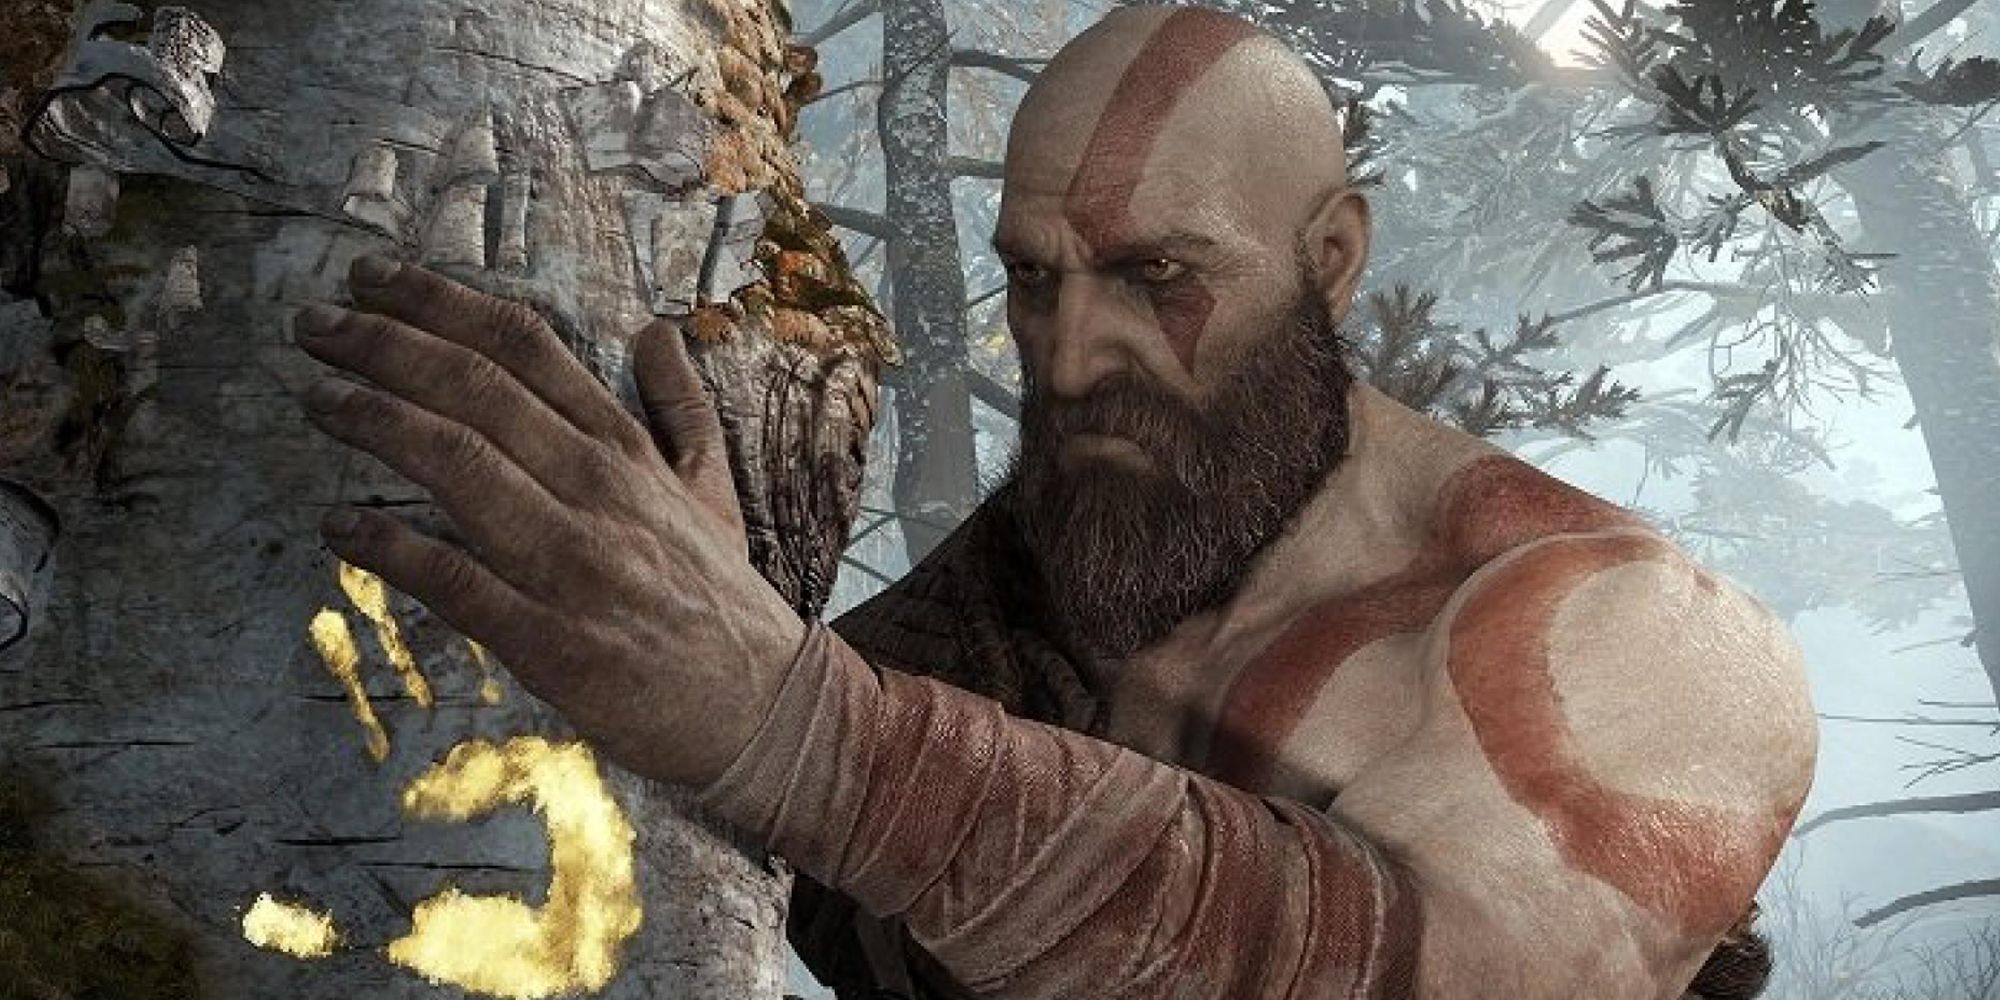 The scene we're likely to see if Kratos kills Freya accidentally